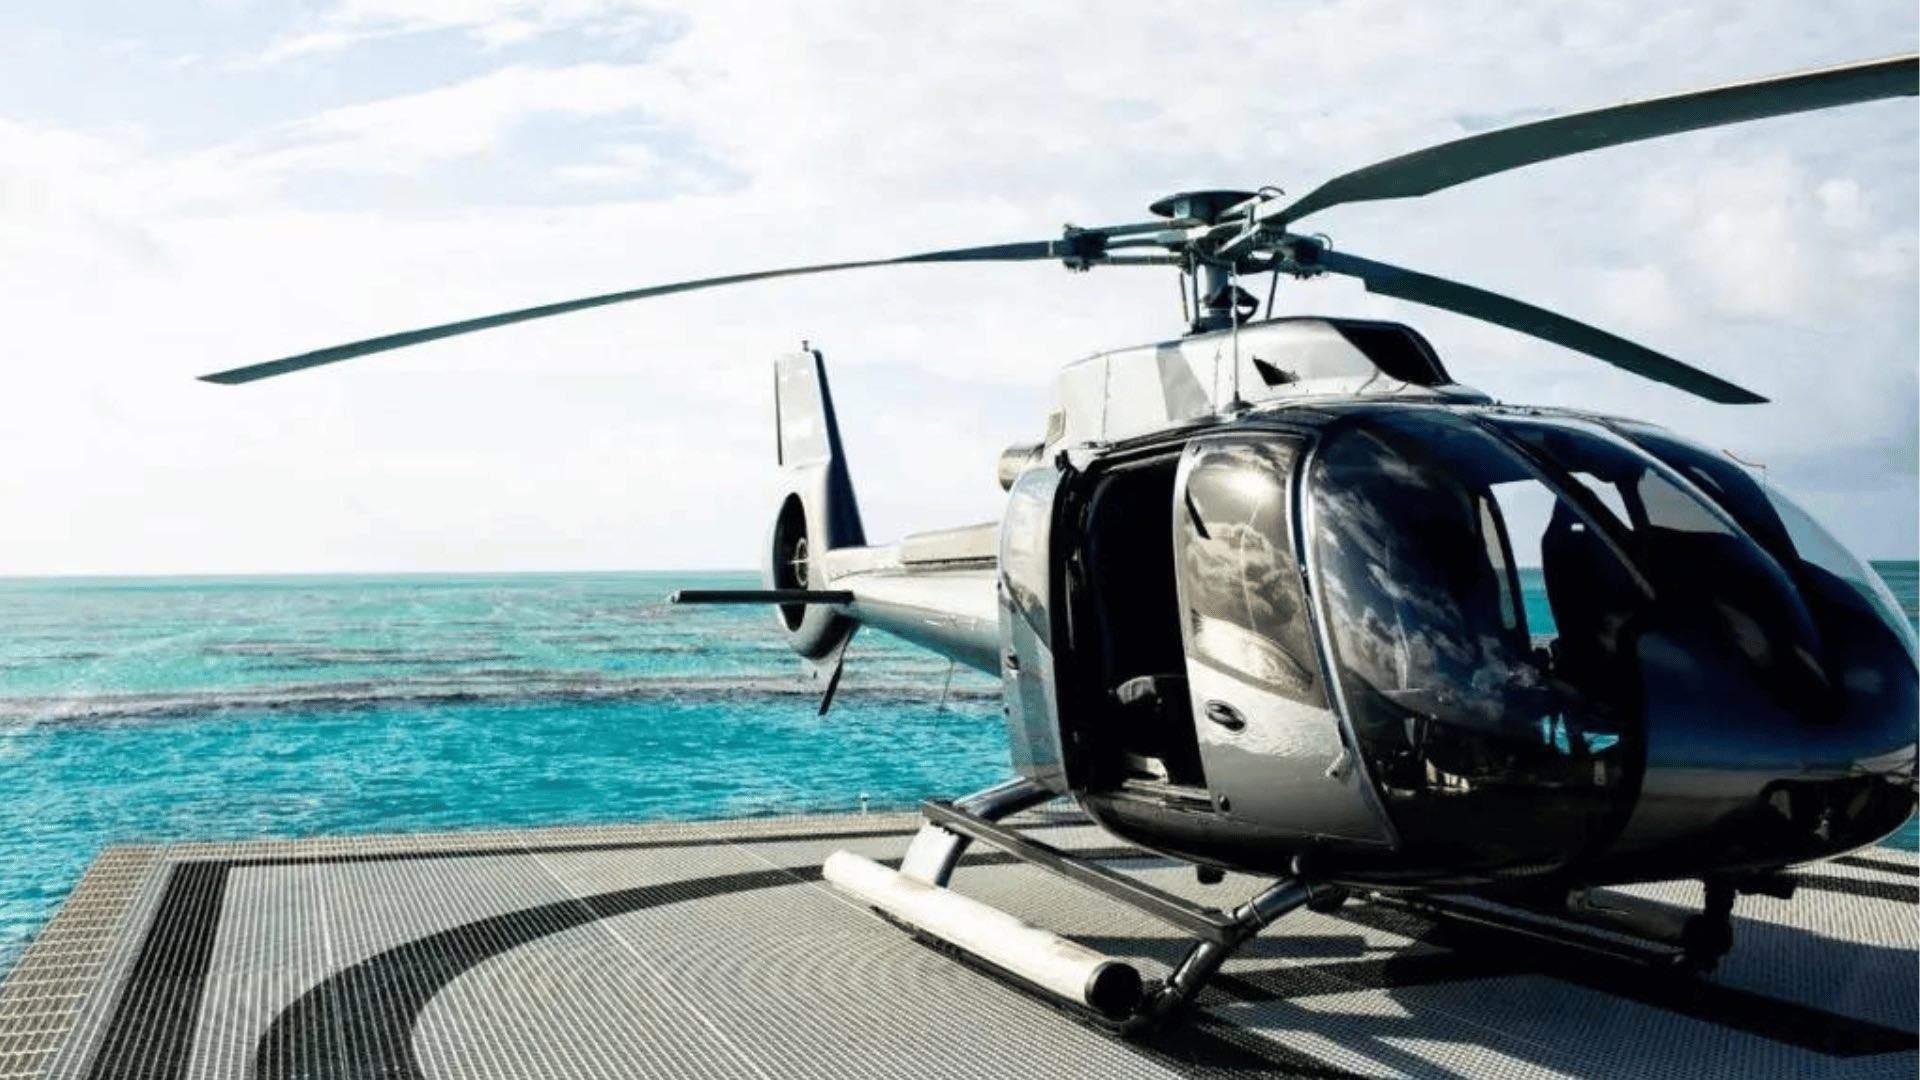 A helicopter on a private pad by the water.